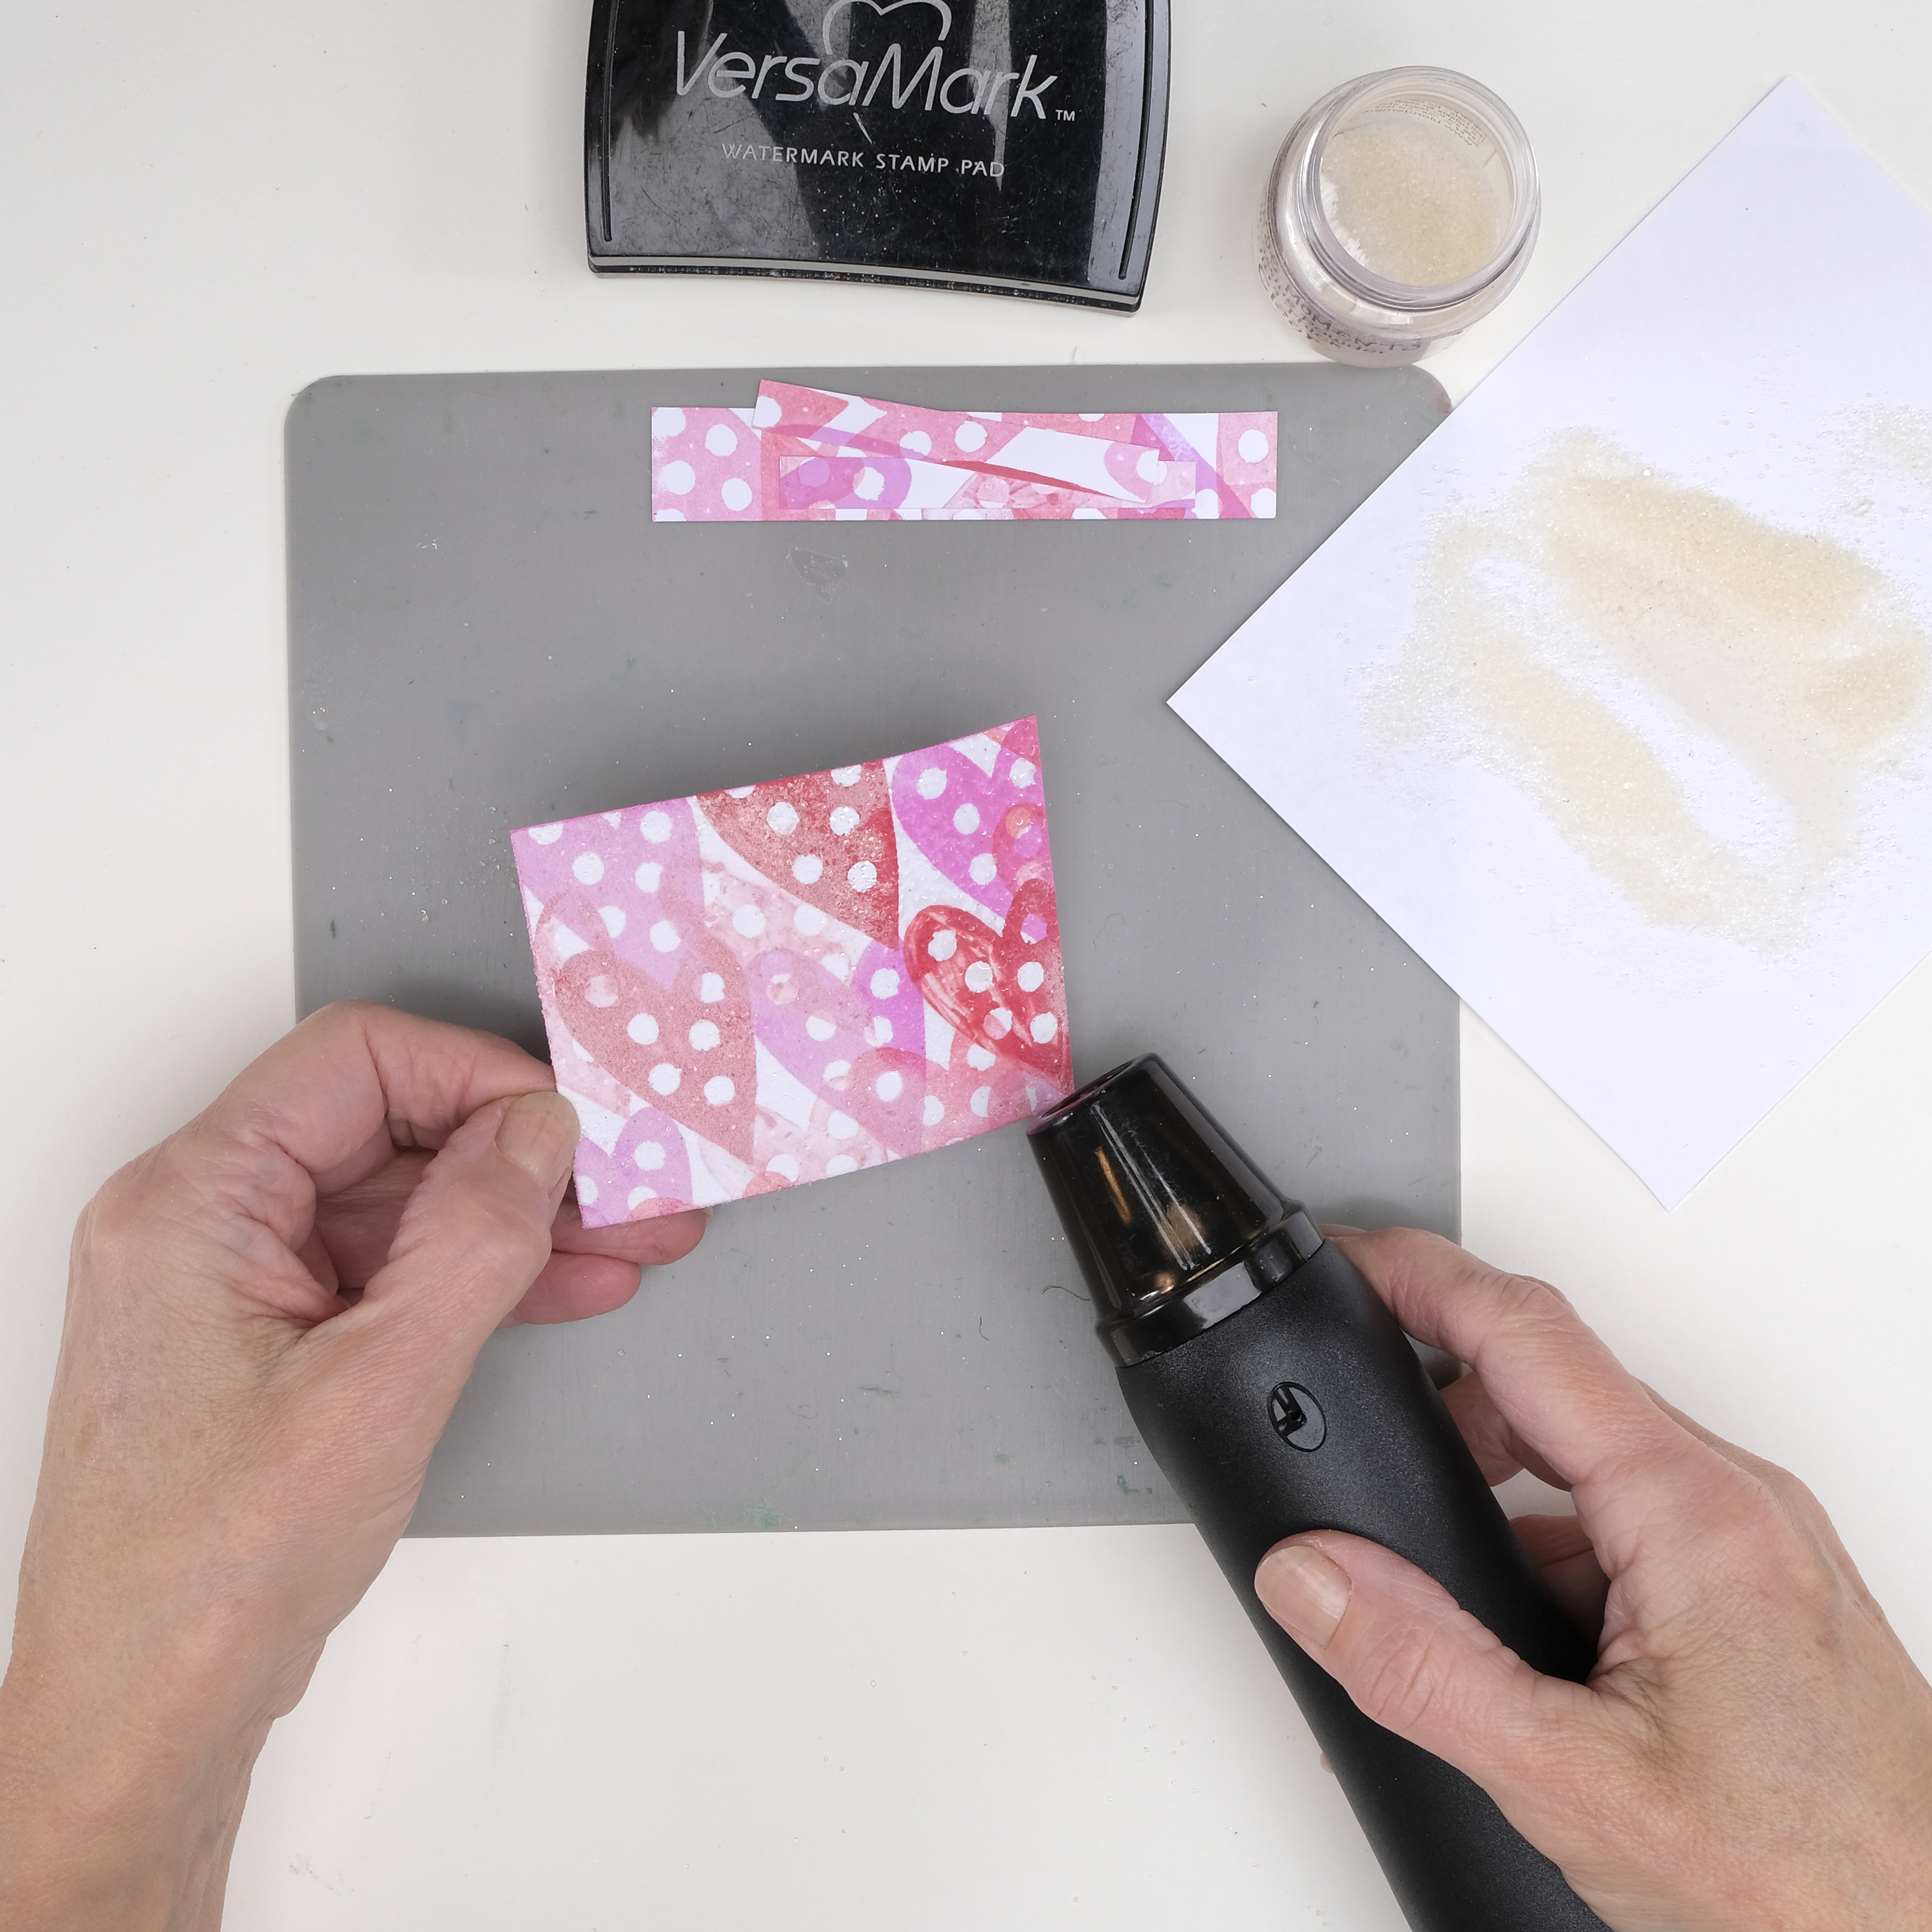 How to make a rubber stamp – step 4